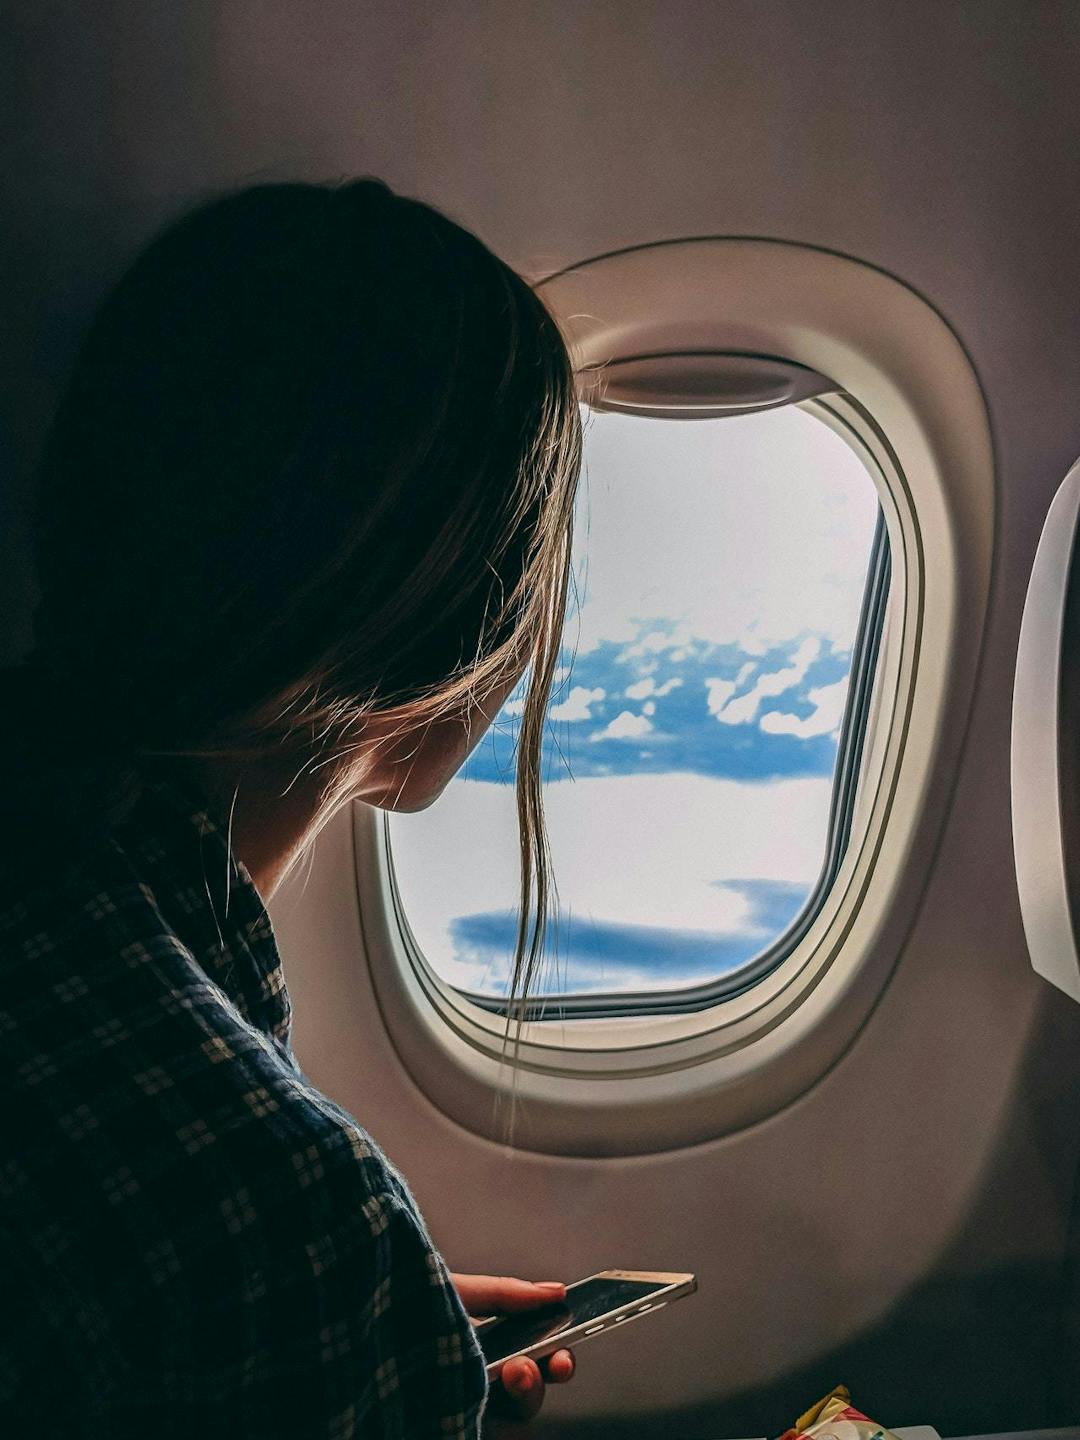 A person holding a phone gazes through an airplane window at clouds and blue sky, creating a serene and contemplative atmosphere.